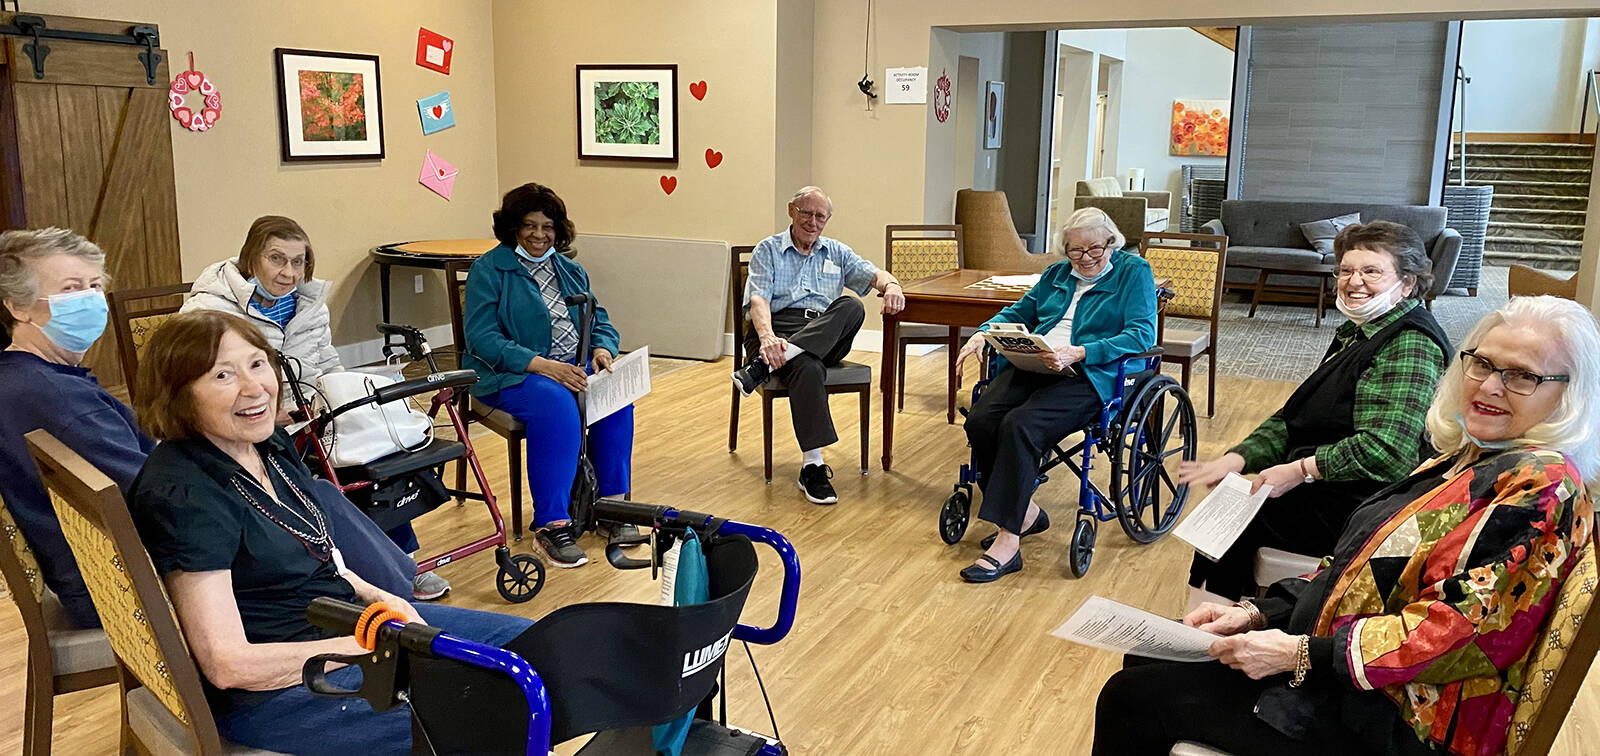 GenCare Federal Way offers a wide variety of activities, and they’re constantly finding new ways to help residents pursue their passions, whether creative, athletic, or social.